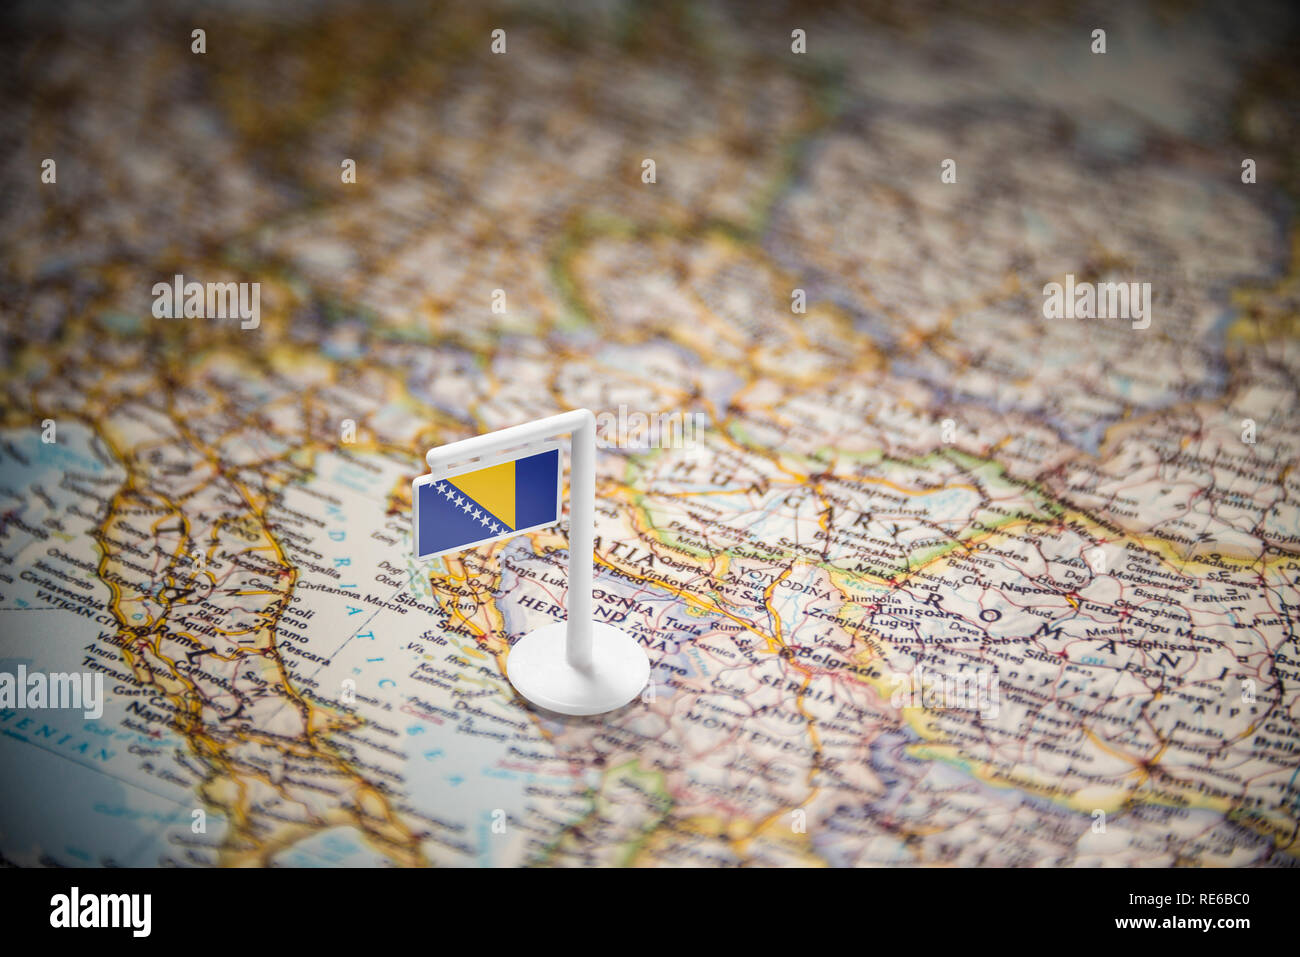 Bosnia and Herzegovina marked with a flag on the map Stock Photo